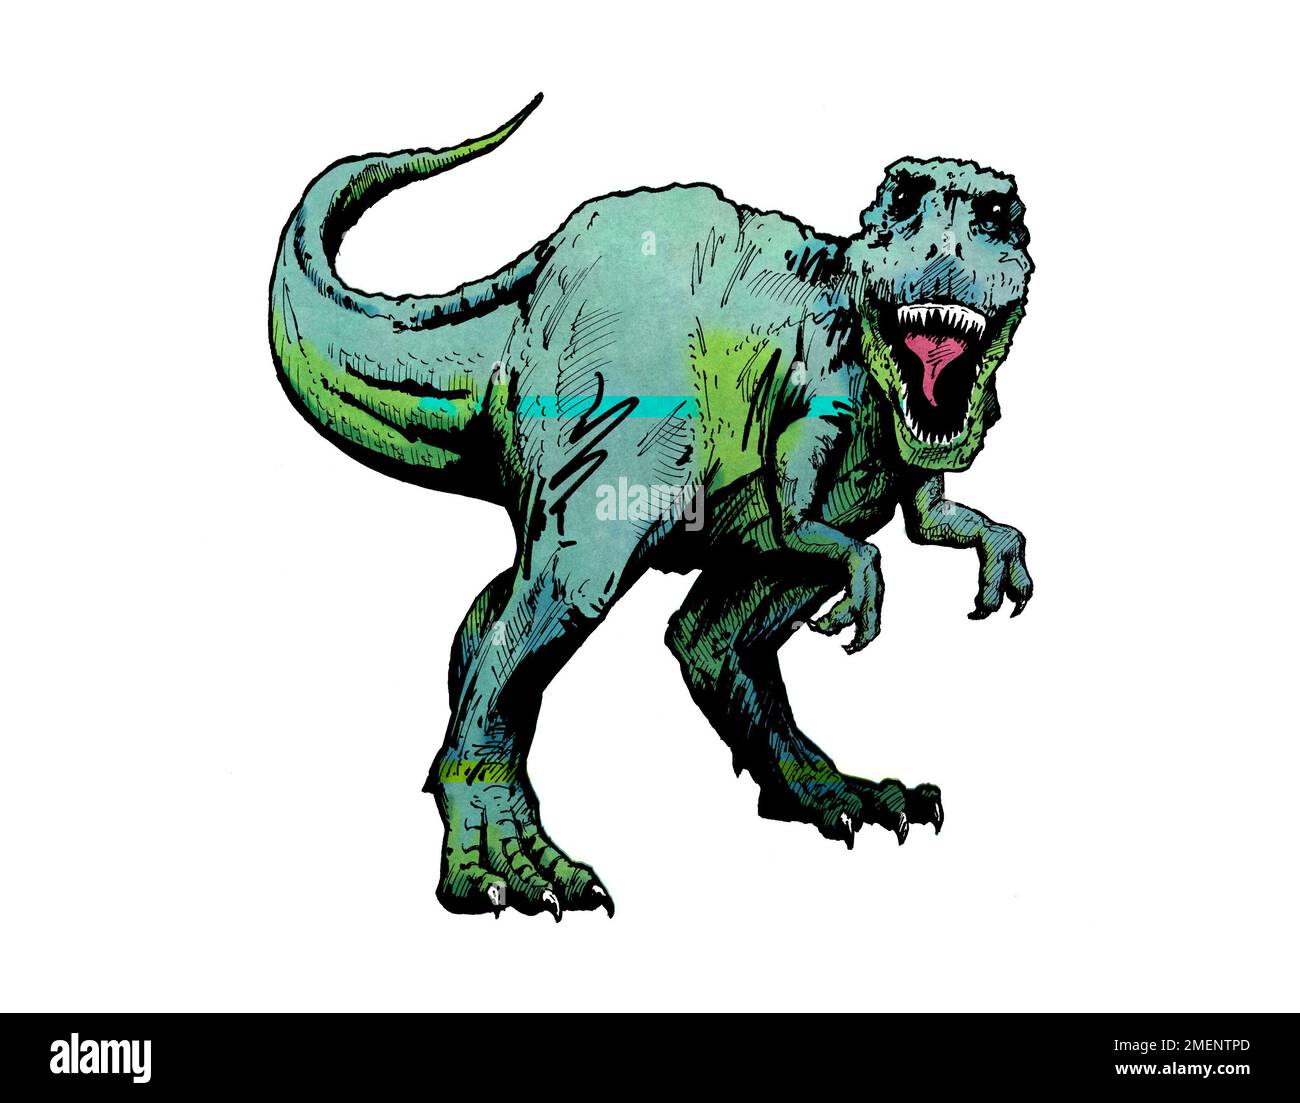 Illustration Of Tyrannosaurus Rex Skeleton A Bipedal Theropod Dinosaur  Standing On One Leg High-Res Vector Graphic - Getty Images